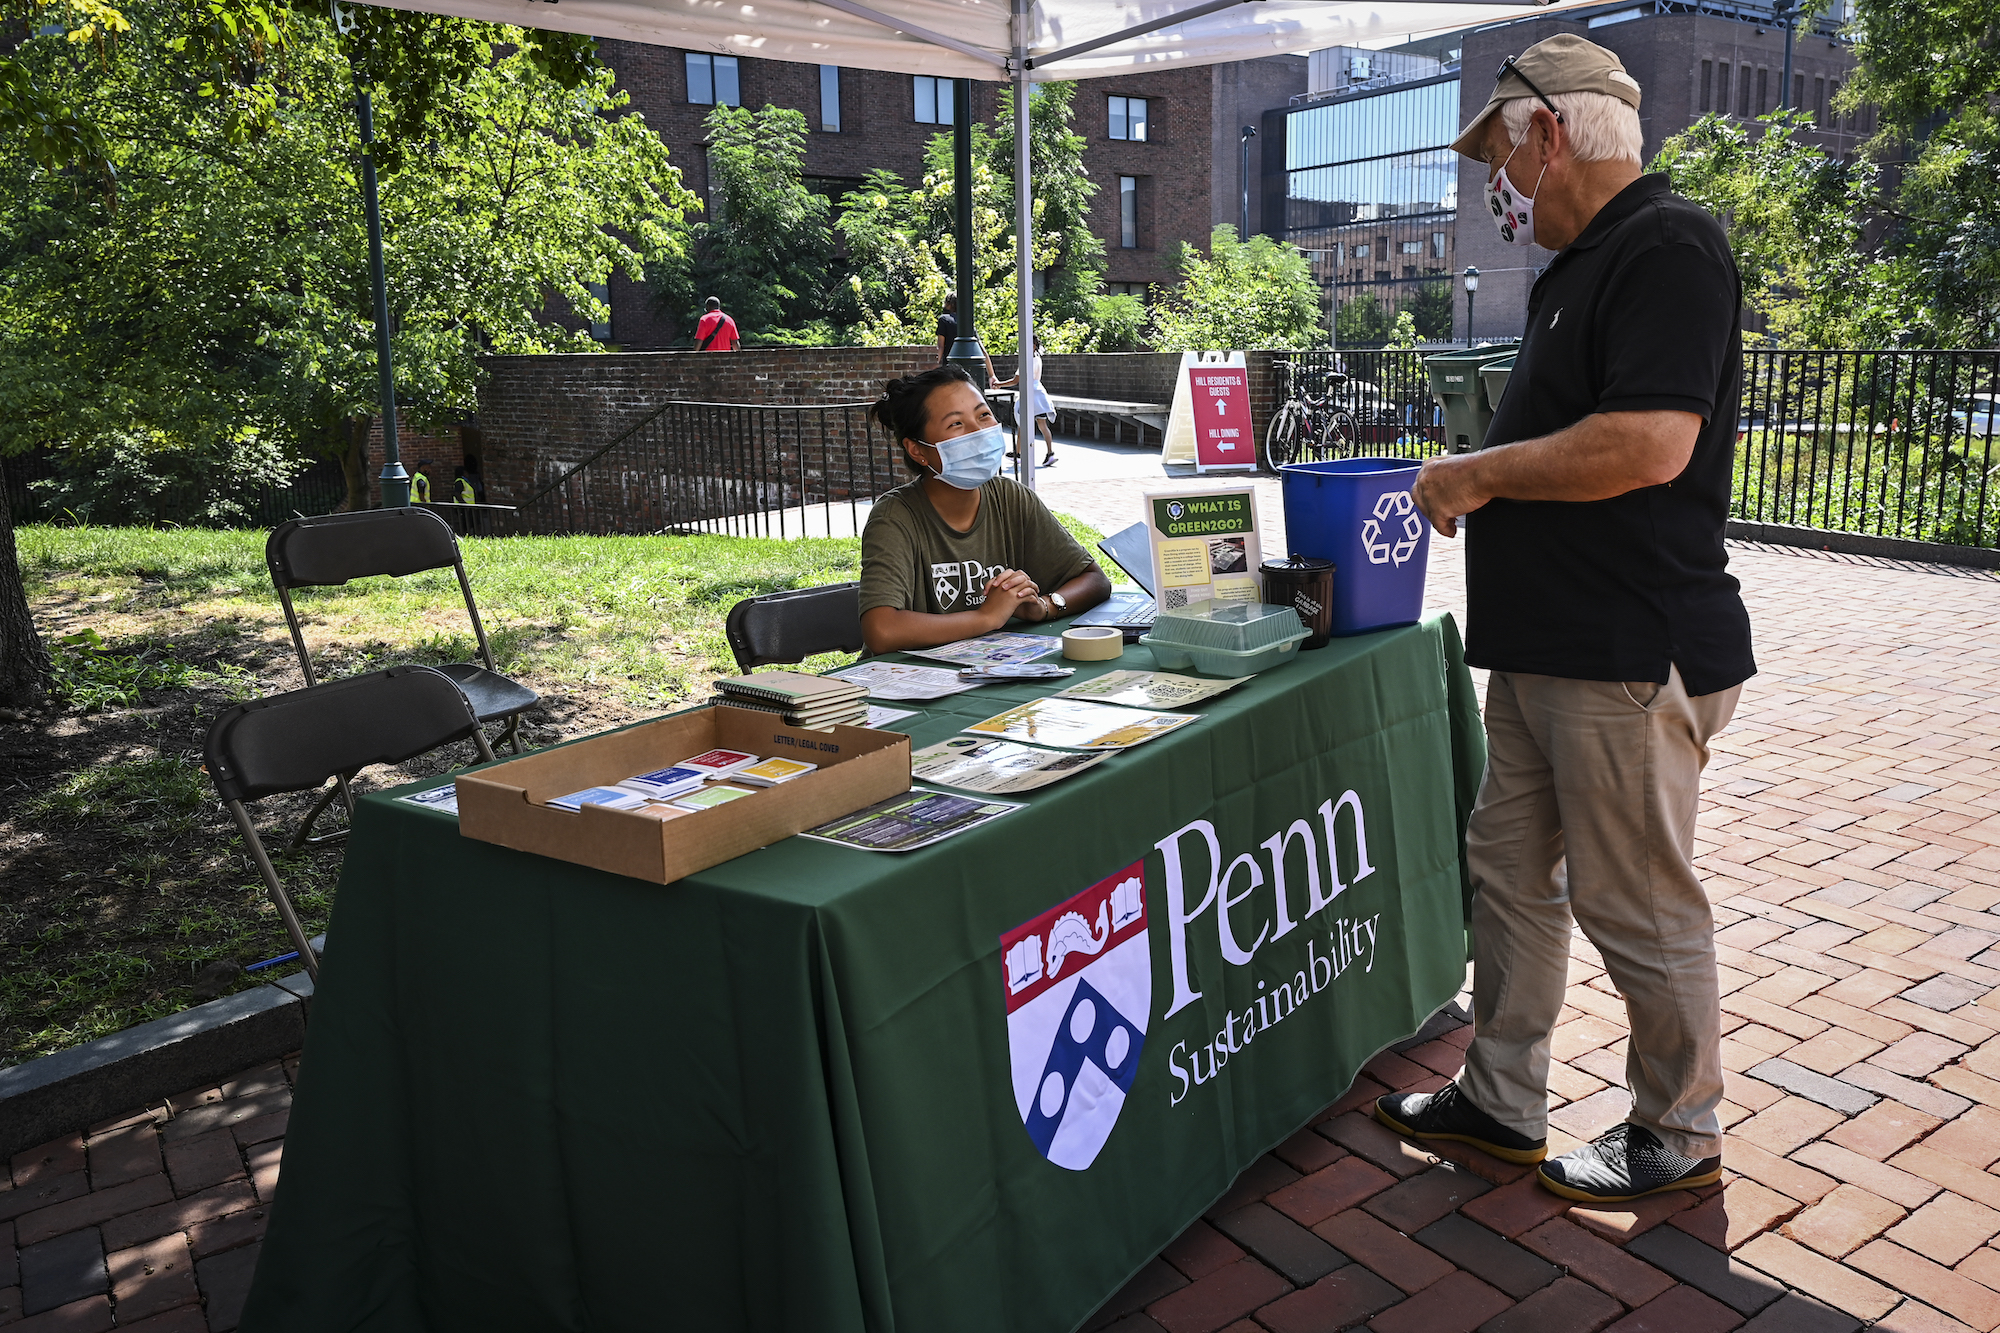 A person seated at a table labeled Penn Sustainability interacts with someone visiting the table